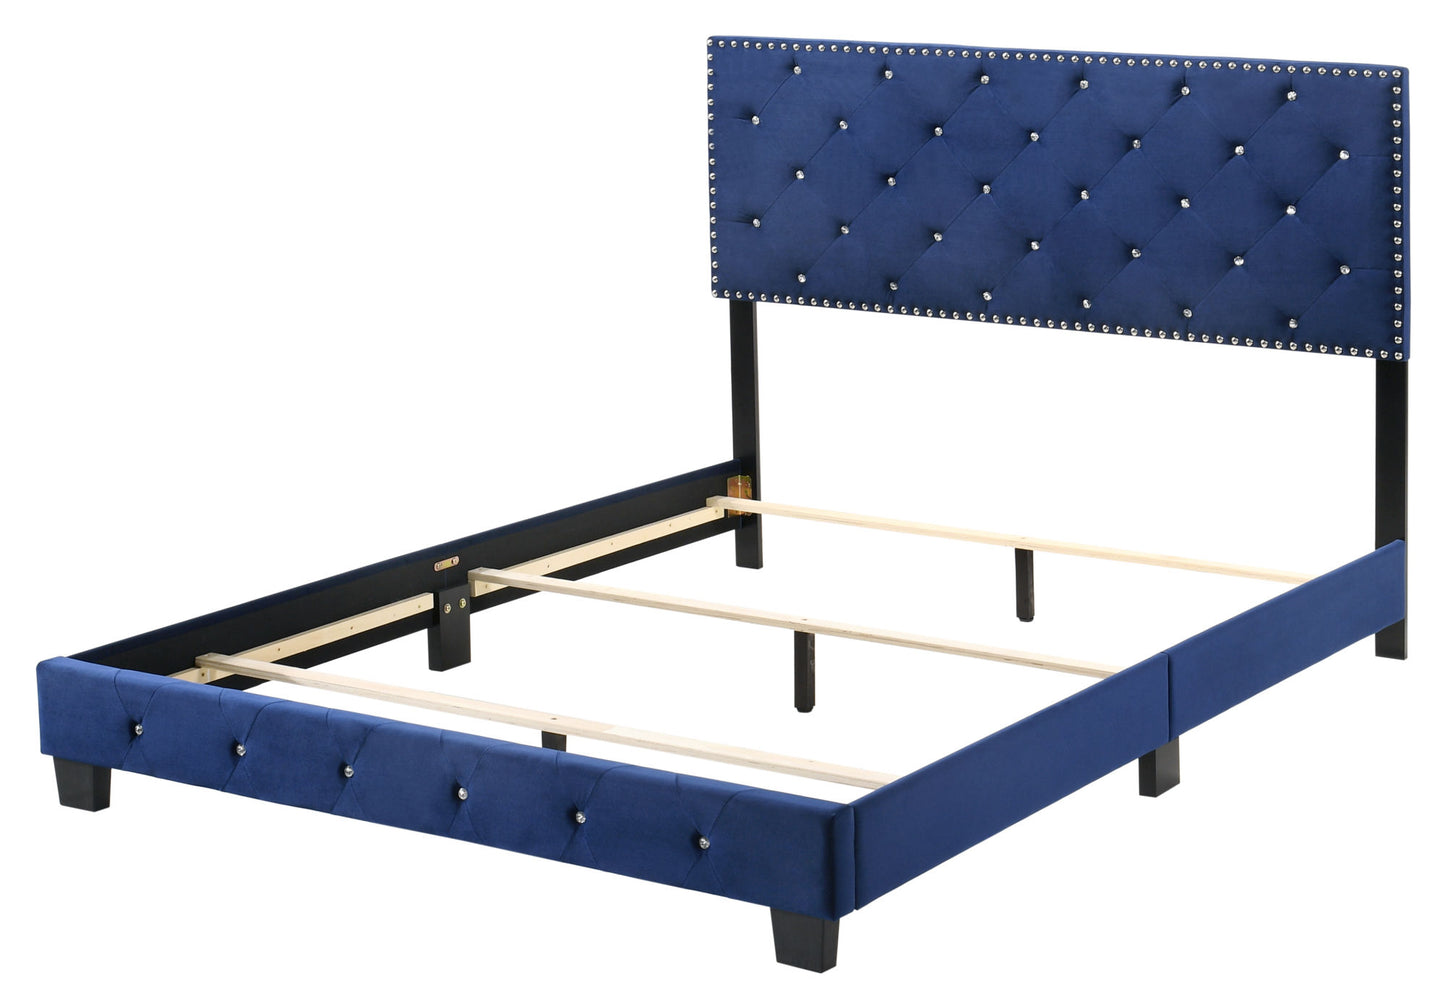 suffolk upholstered bed, navy blue